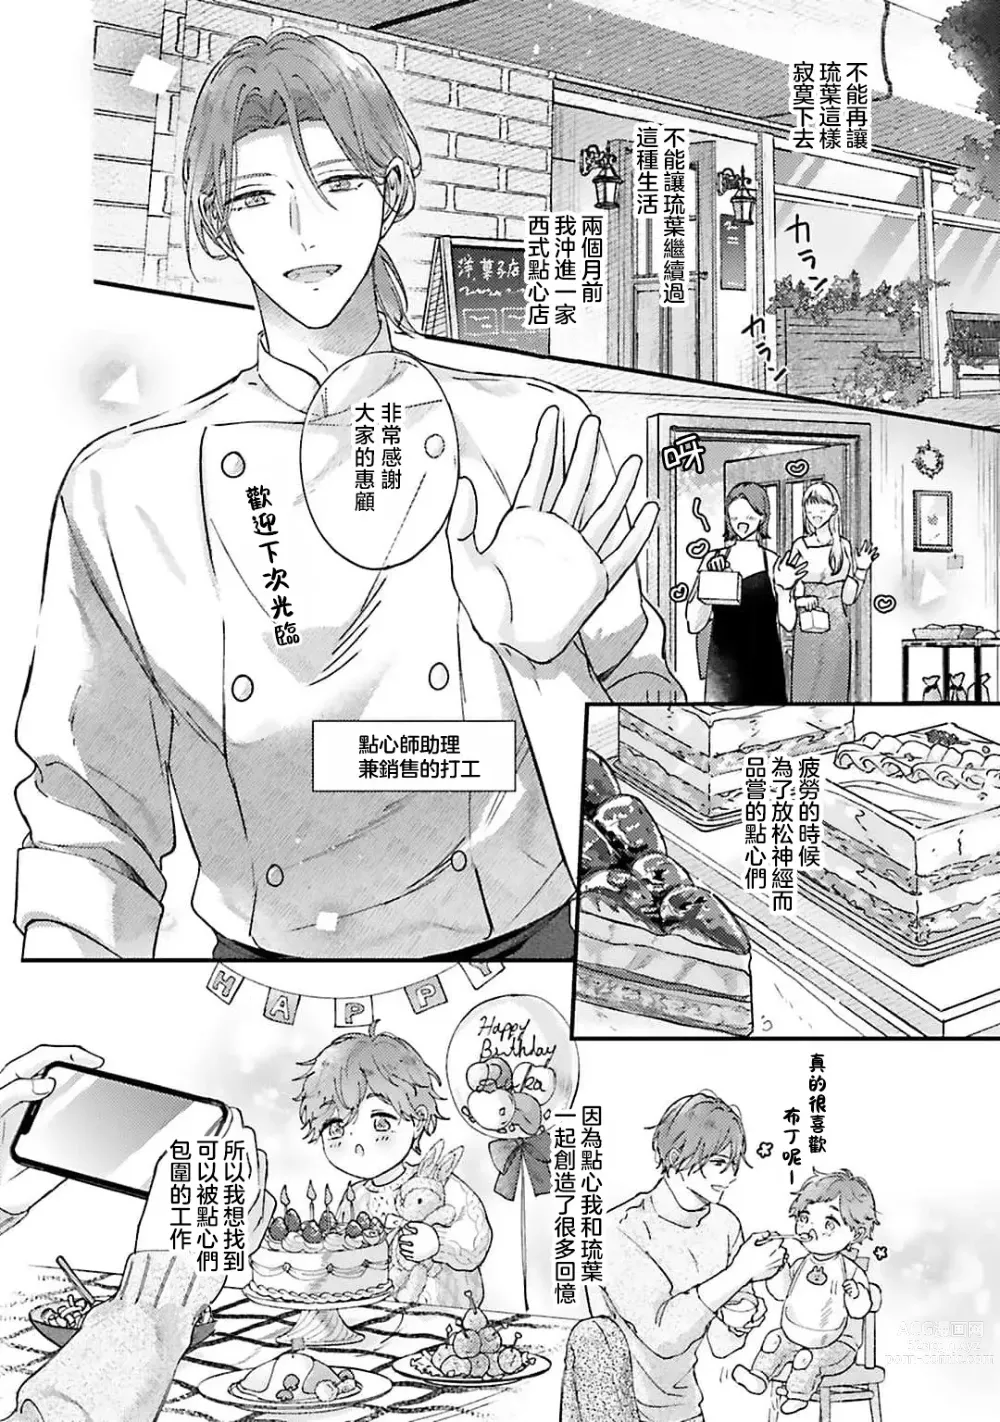 Page 10 of manga 开始当爸爸的两人 another 1